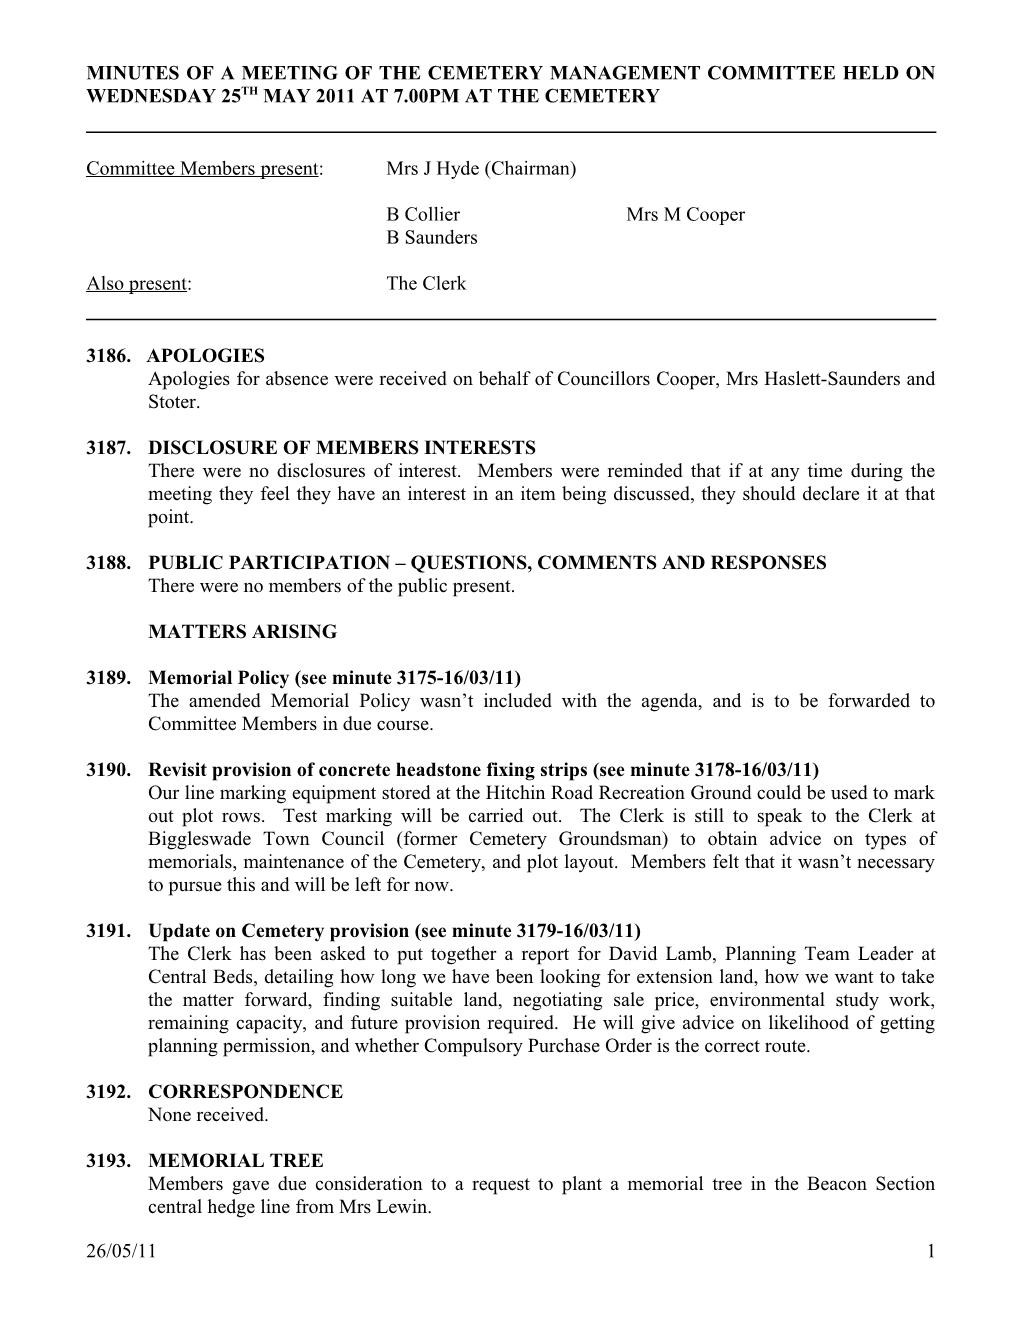 Minutes of a Meeting of the Cemetery Management Committee Held on Wednesday 25Th May 2011 at 7